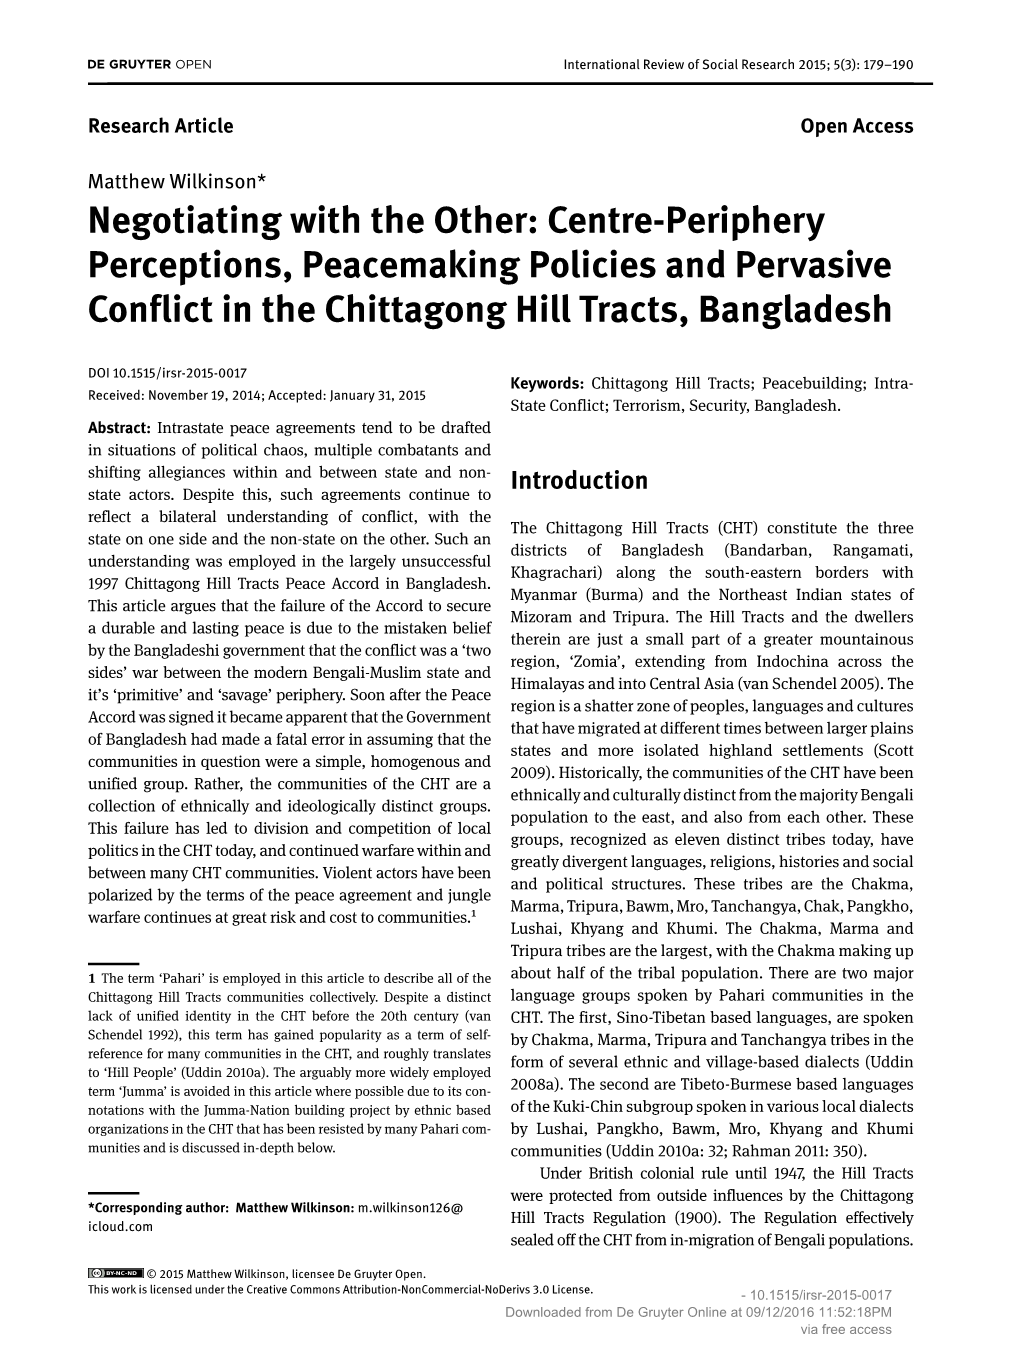 Centre-Periphery Perceptions, Peacemaking Policies and Pervasive Conflict in the Chittagong Hill Tracts, Bangladesh